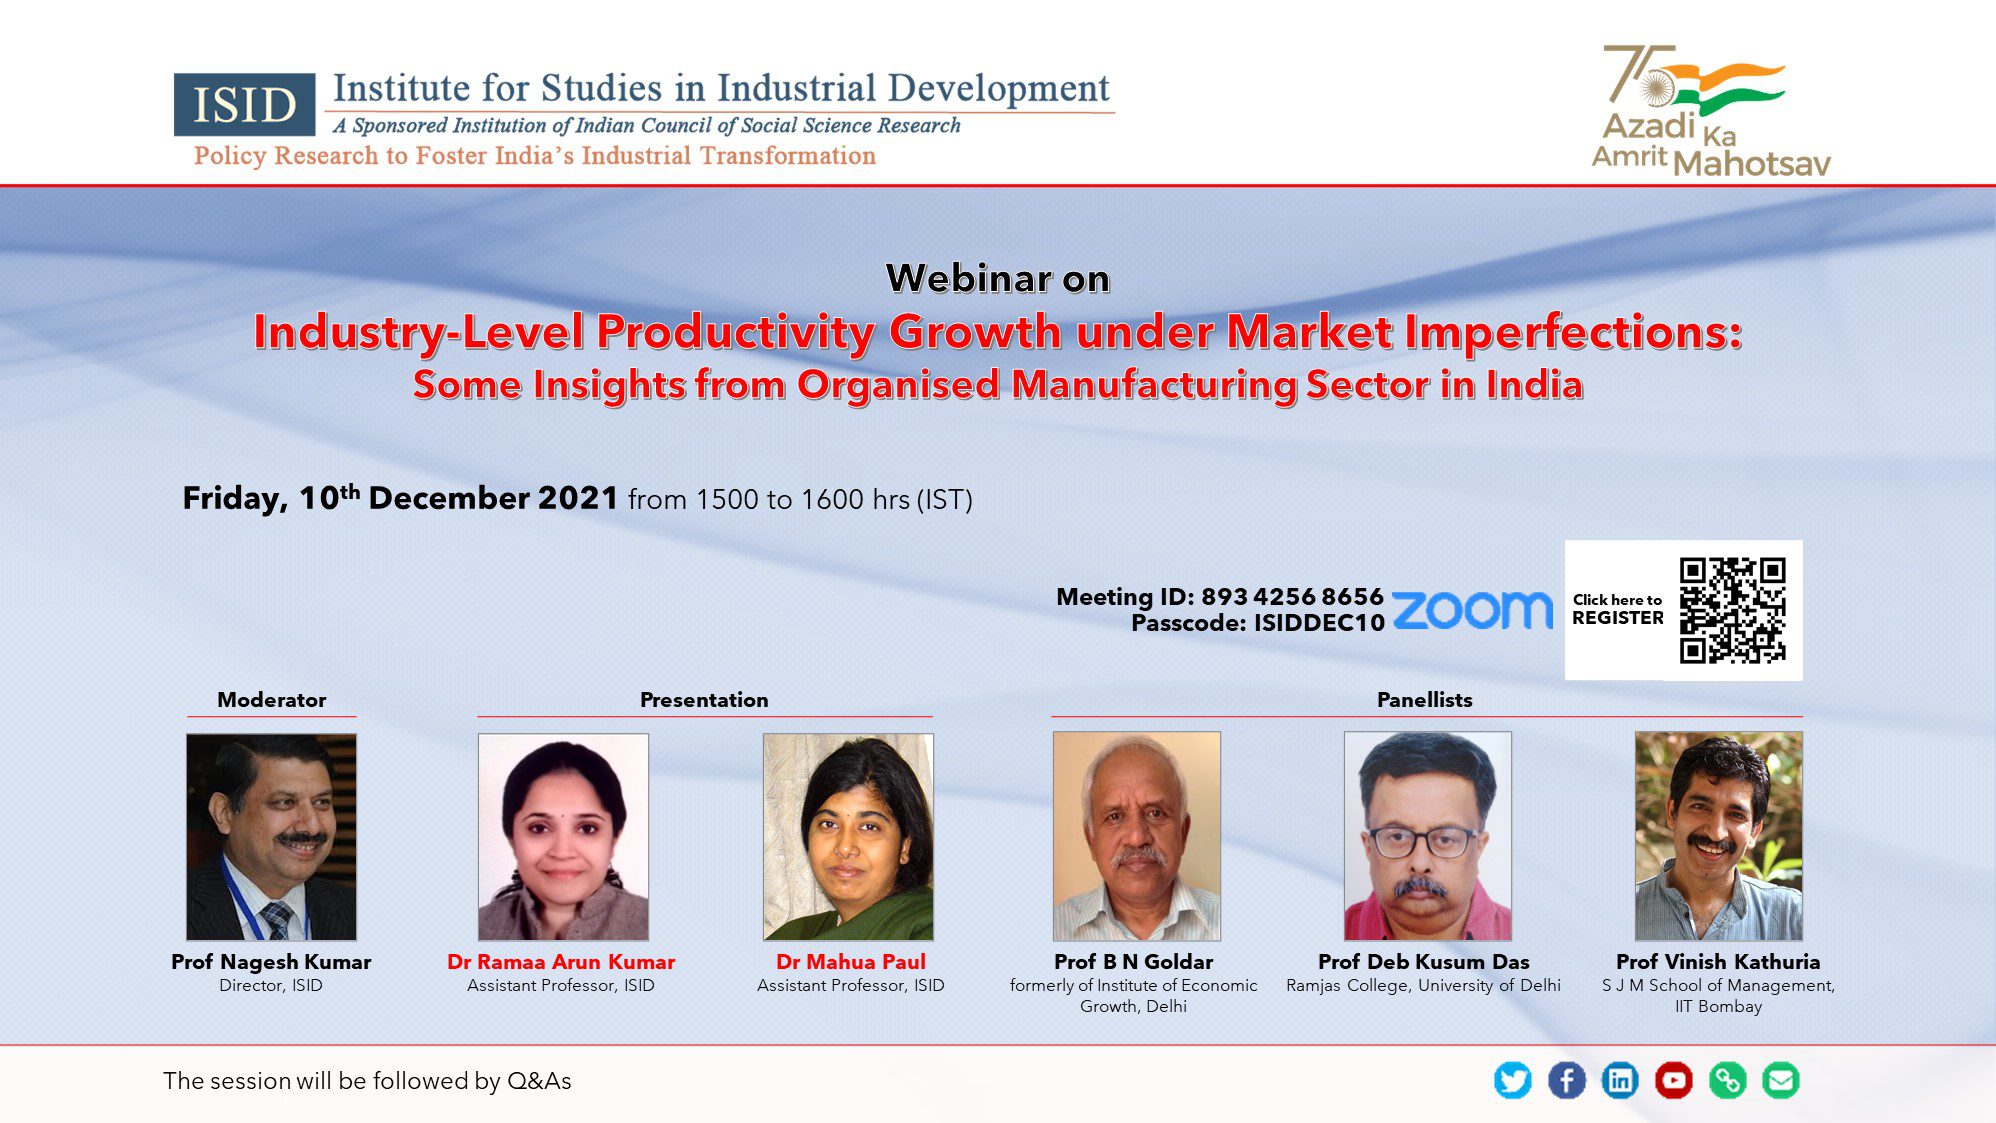 ISID Webinar on Industry-Level Productivity Growth under Market Imperfections